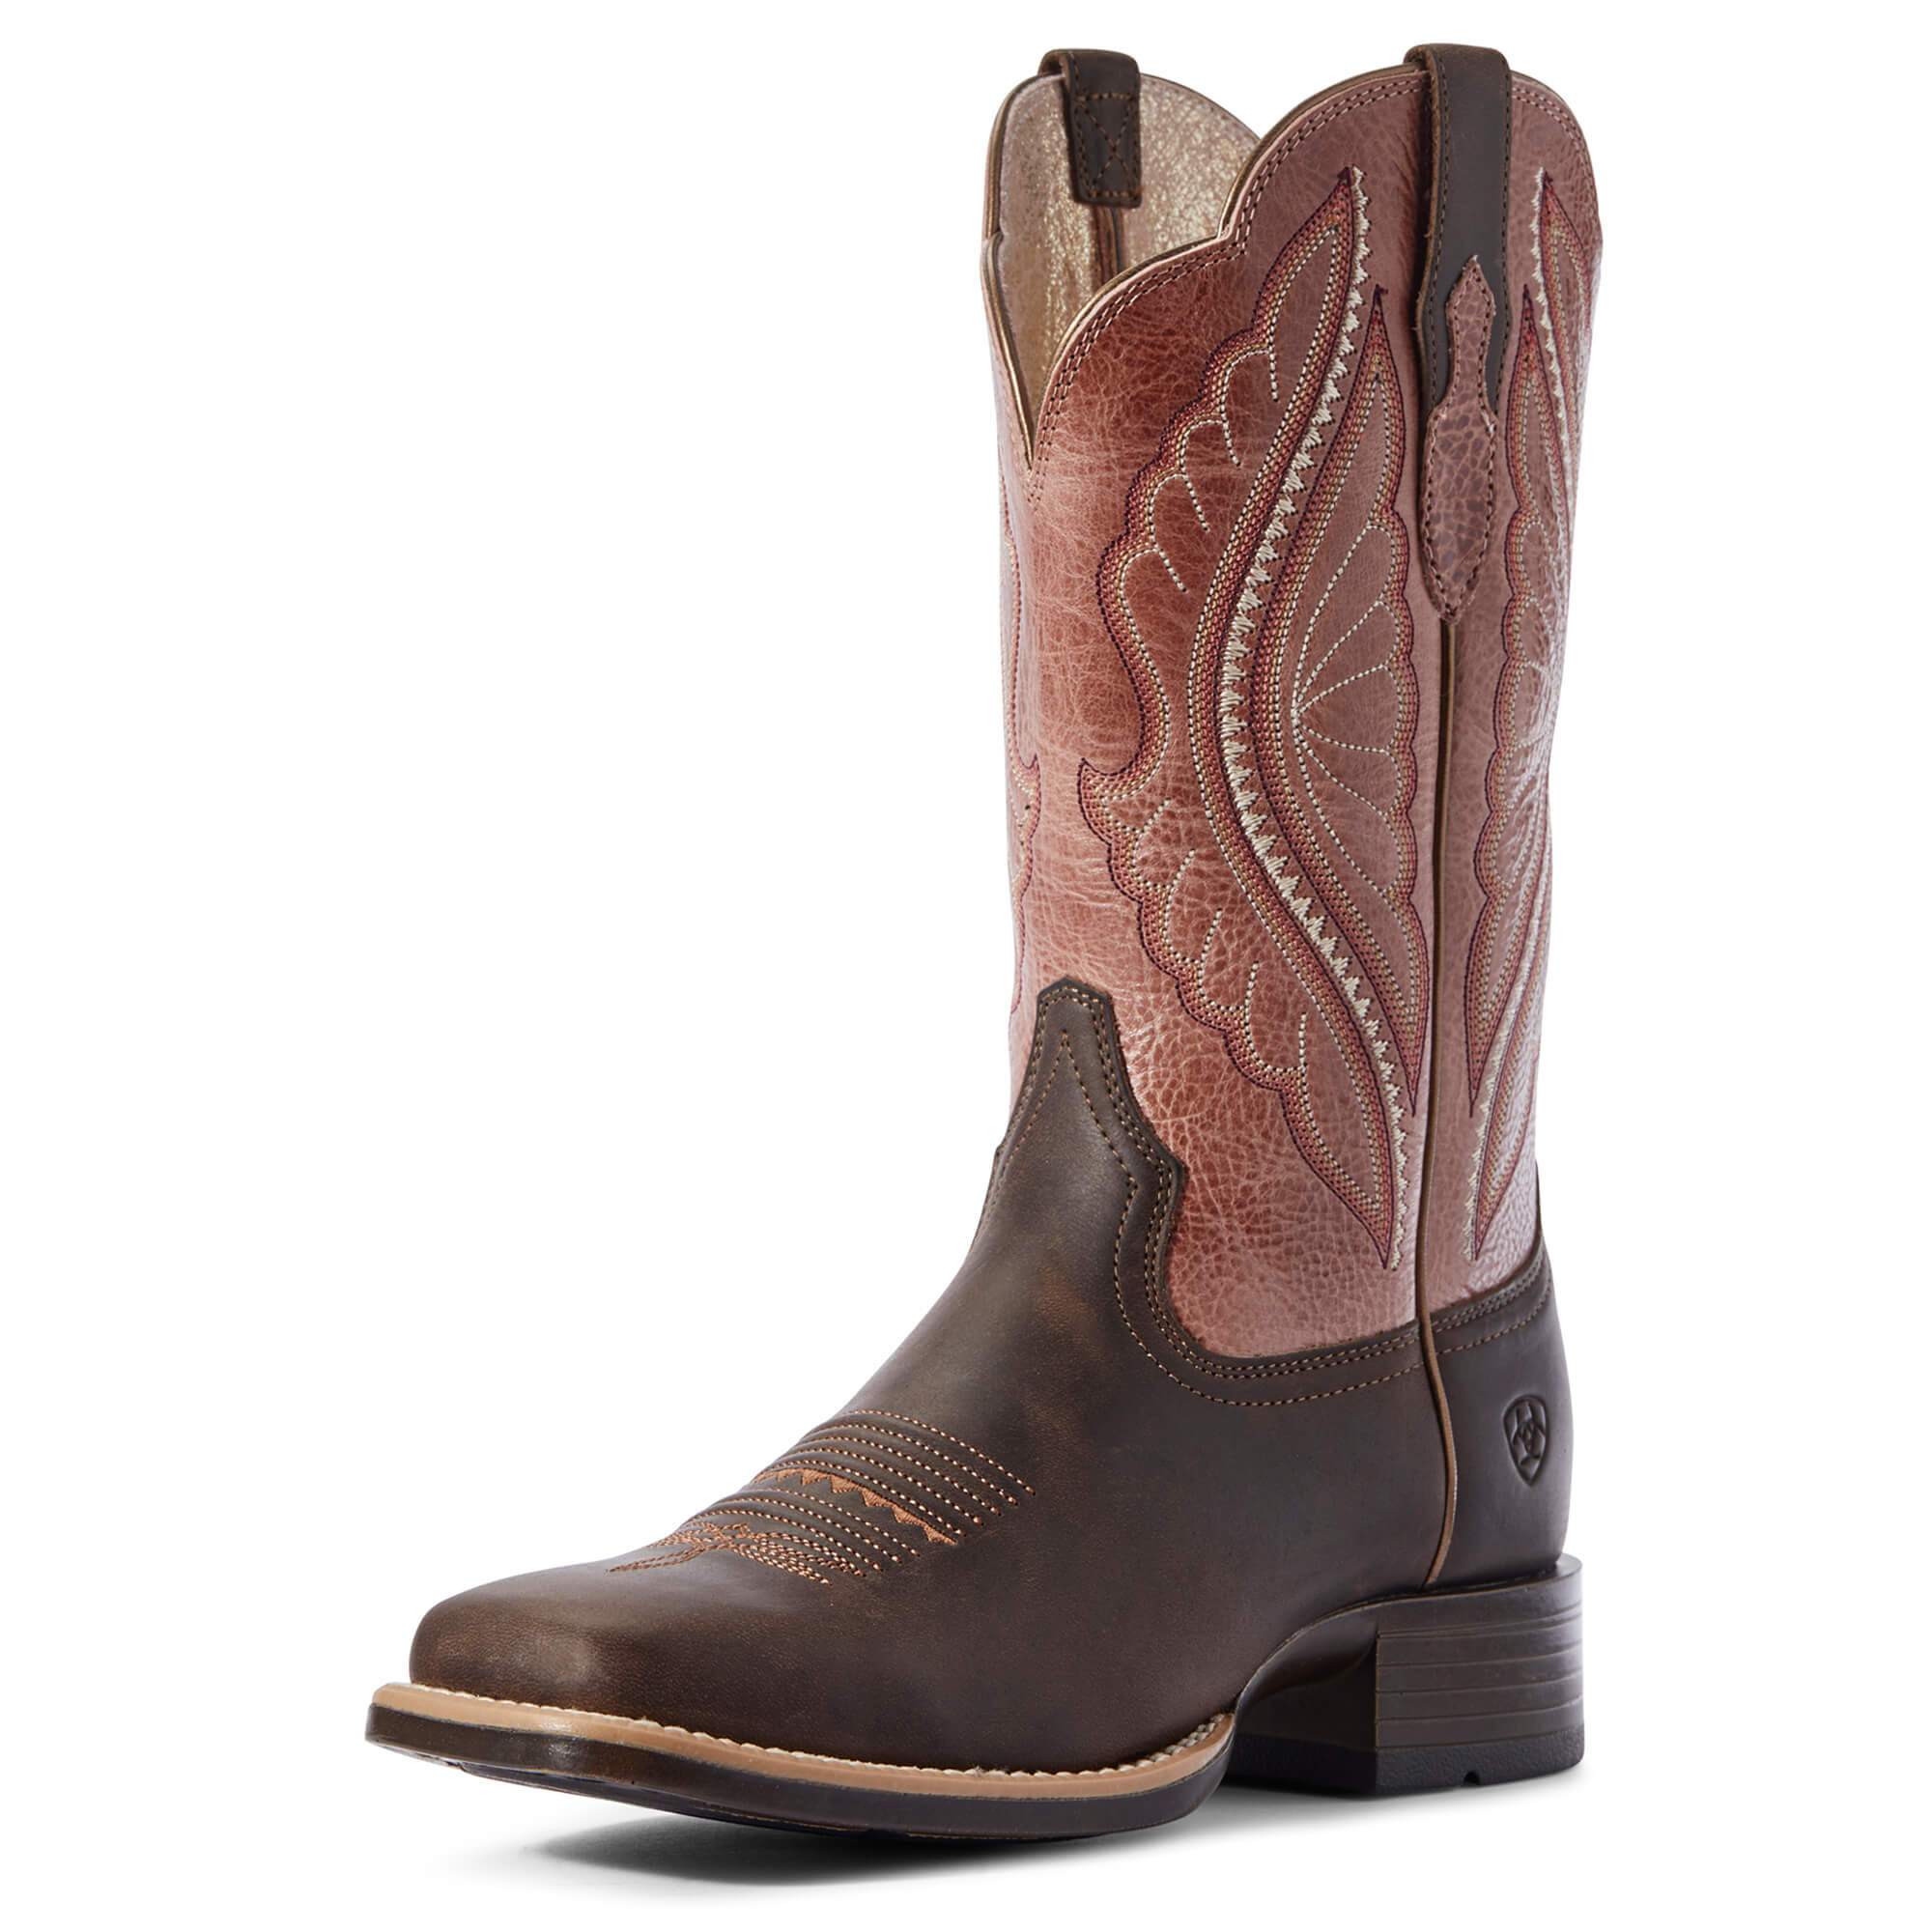 Women's PrimeTime Western Boots in Dark Java Leather  by Ariat